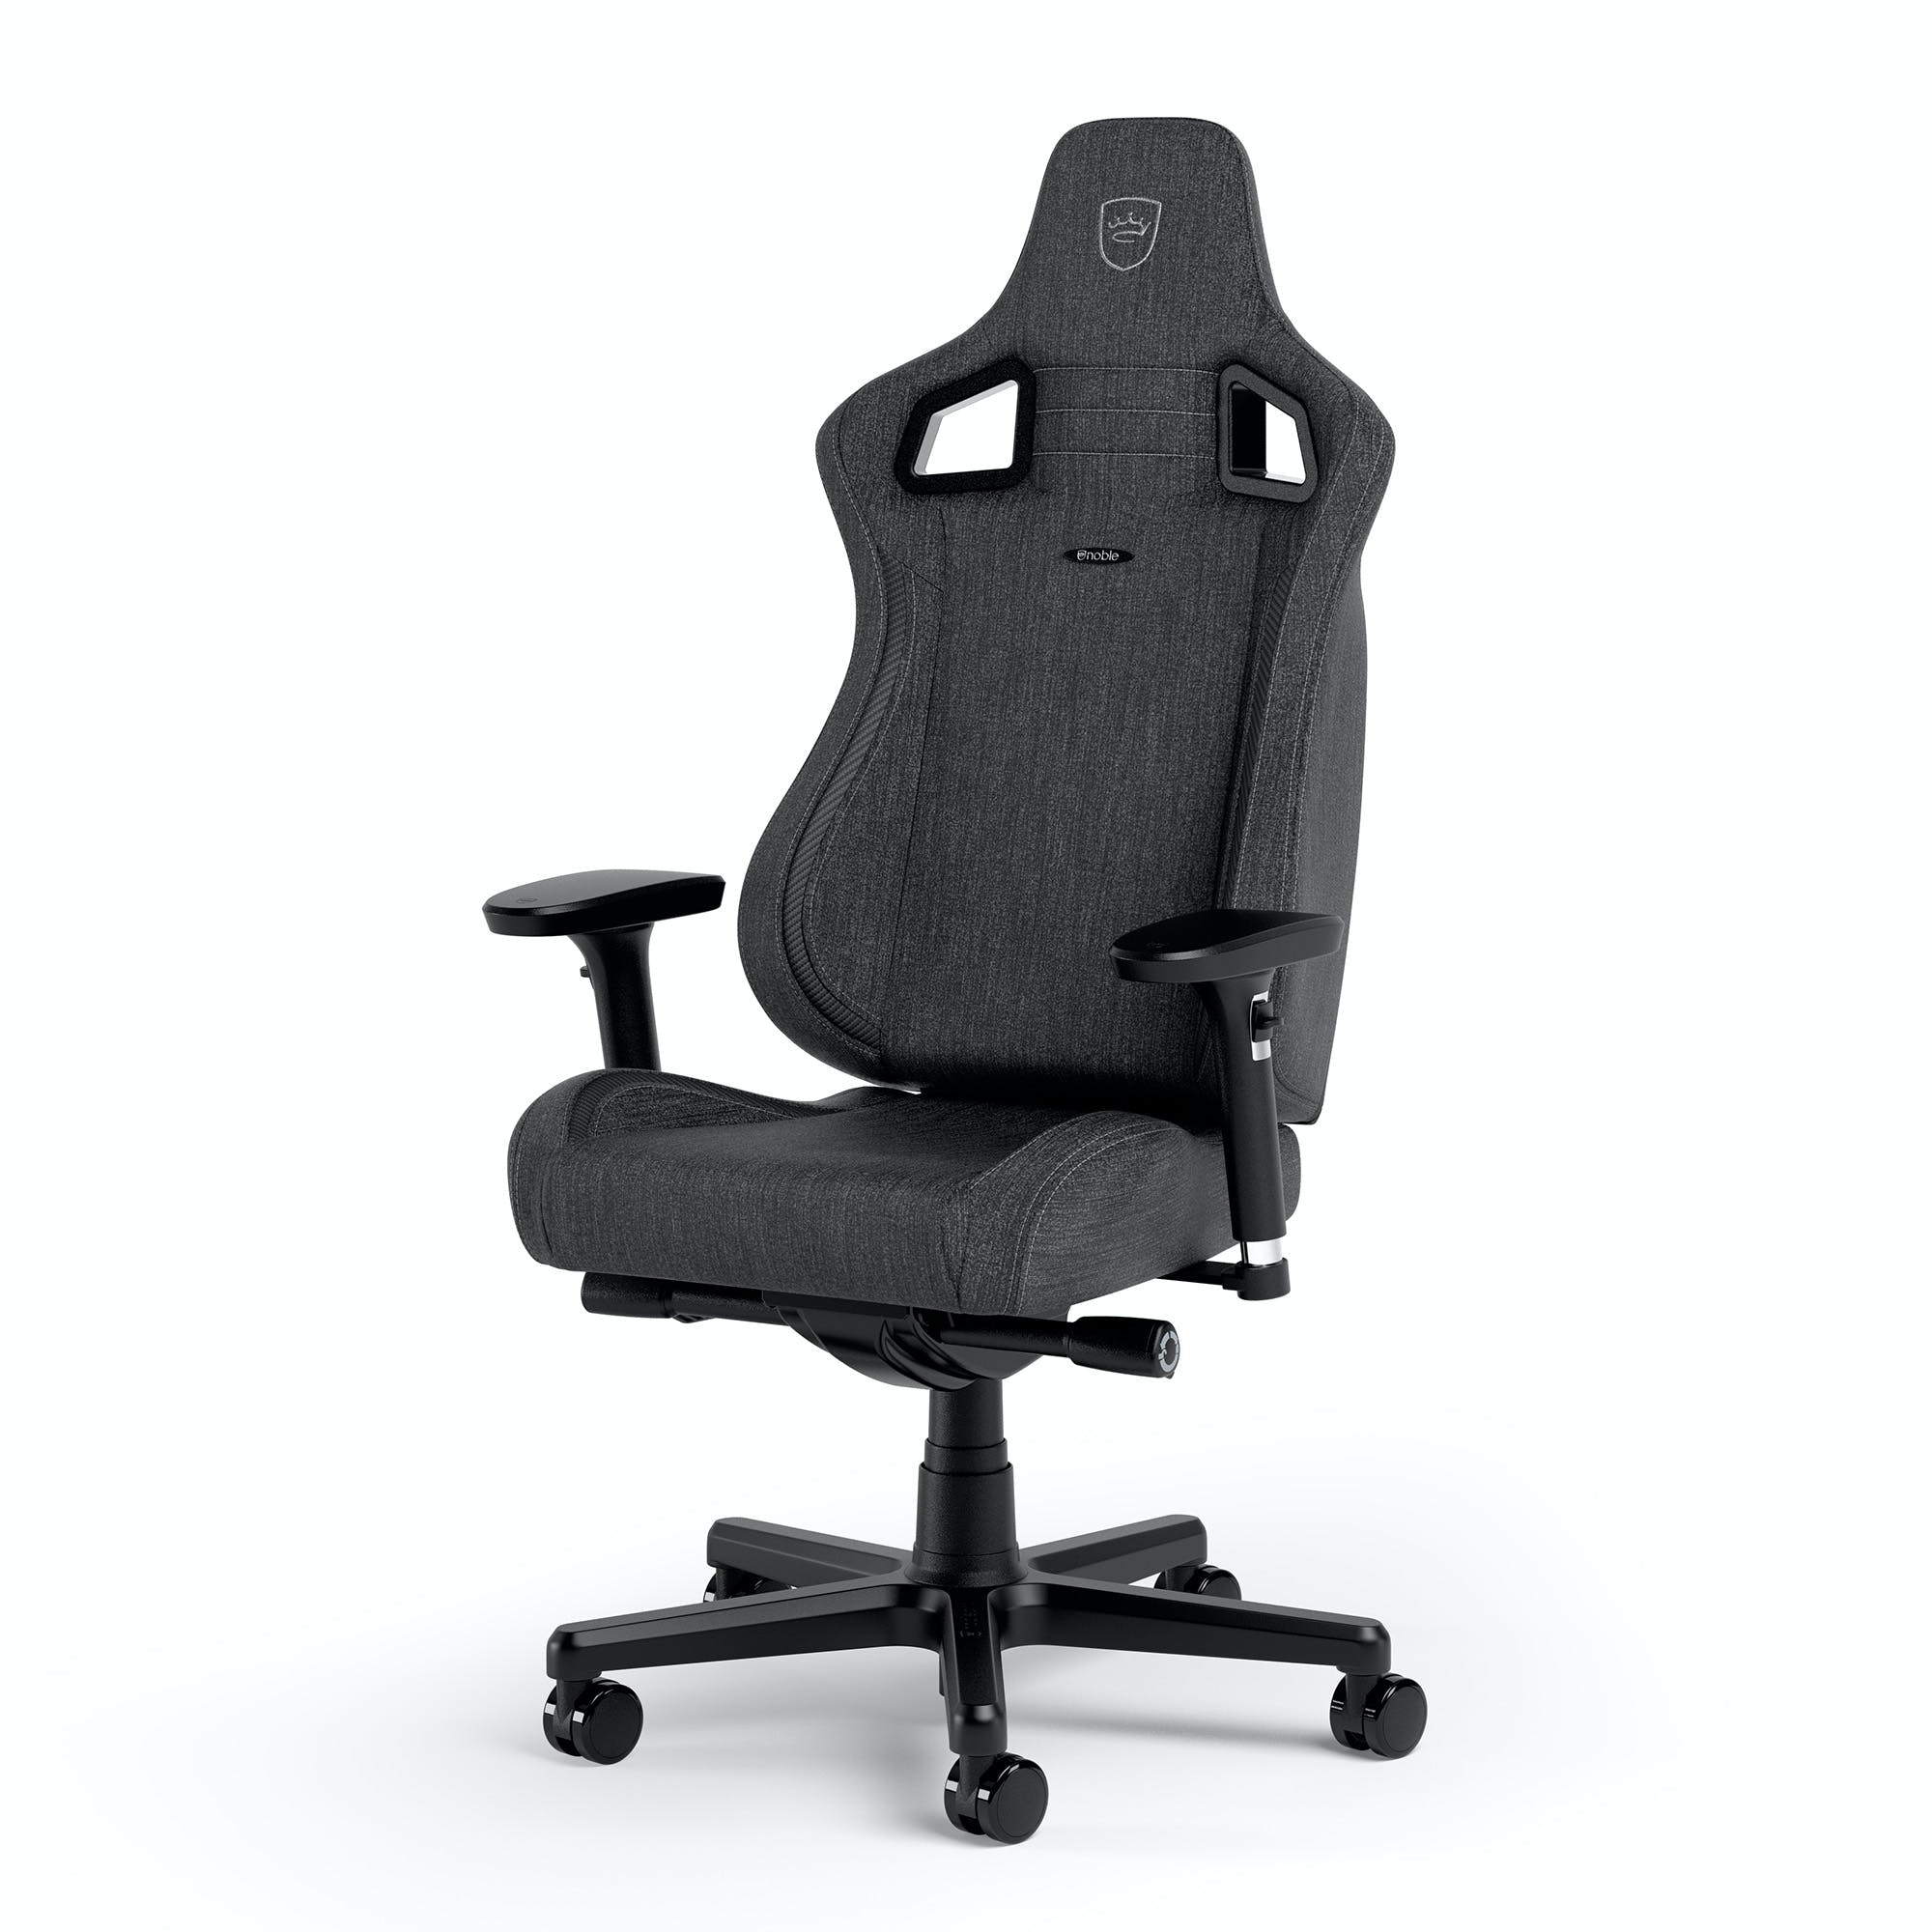 noblechairs EPIC Compact TX Gaming Chair- Anthracite